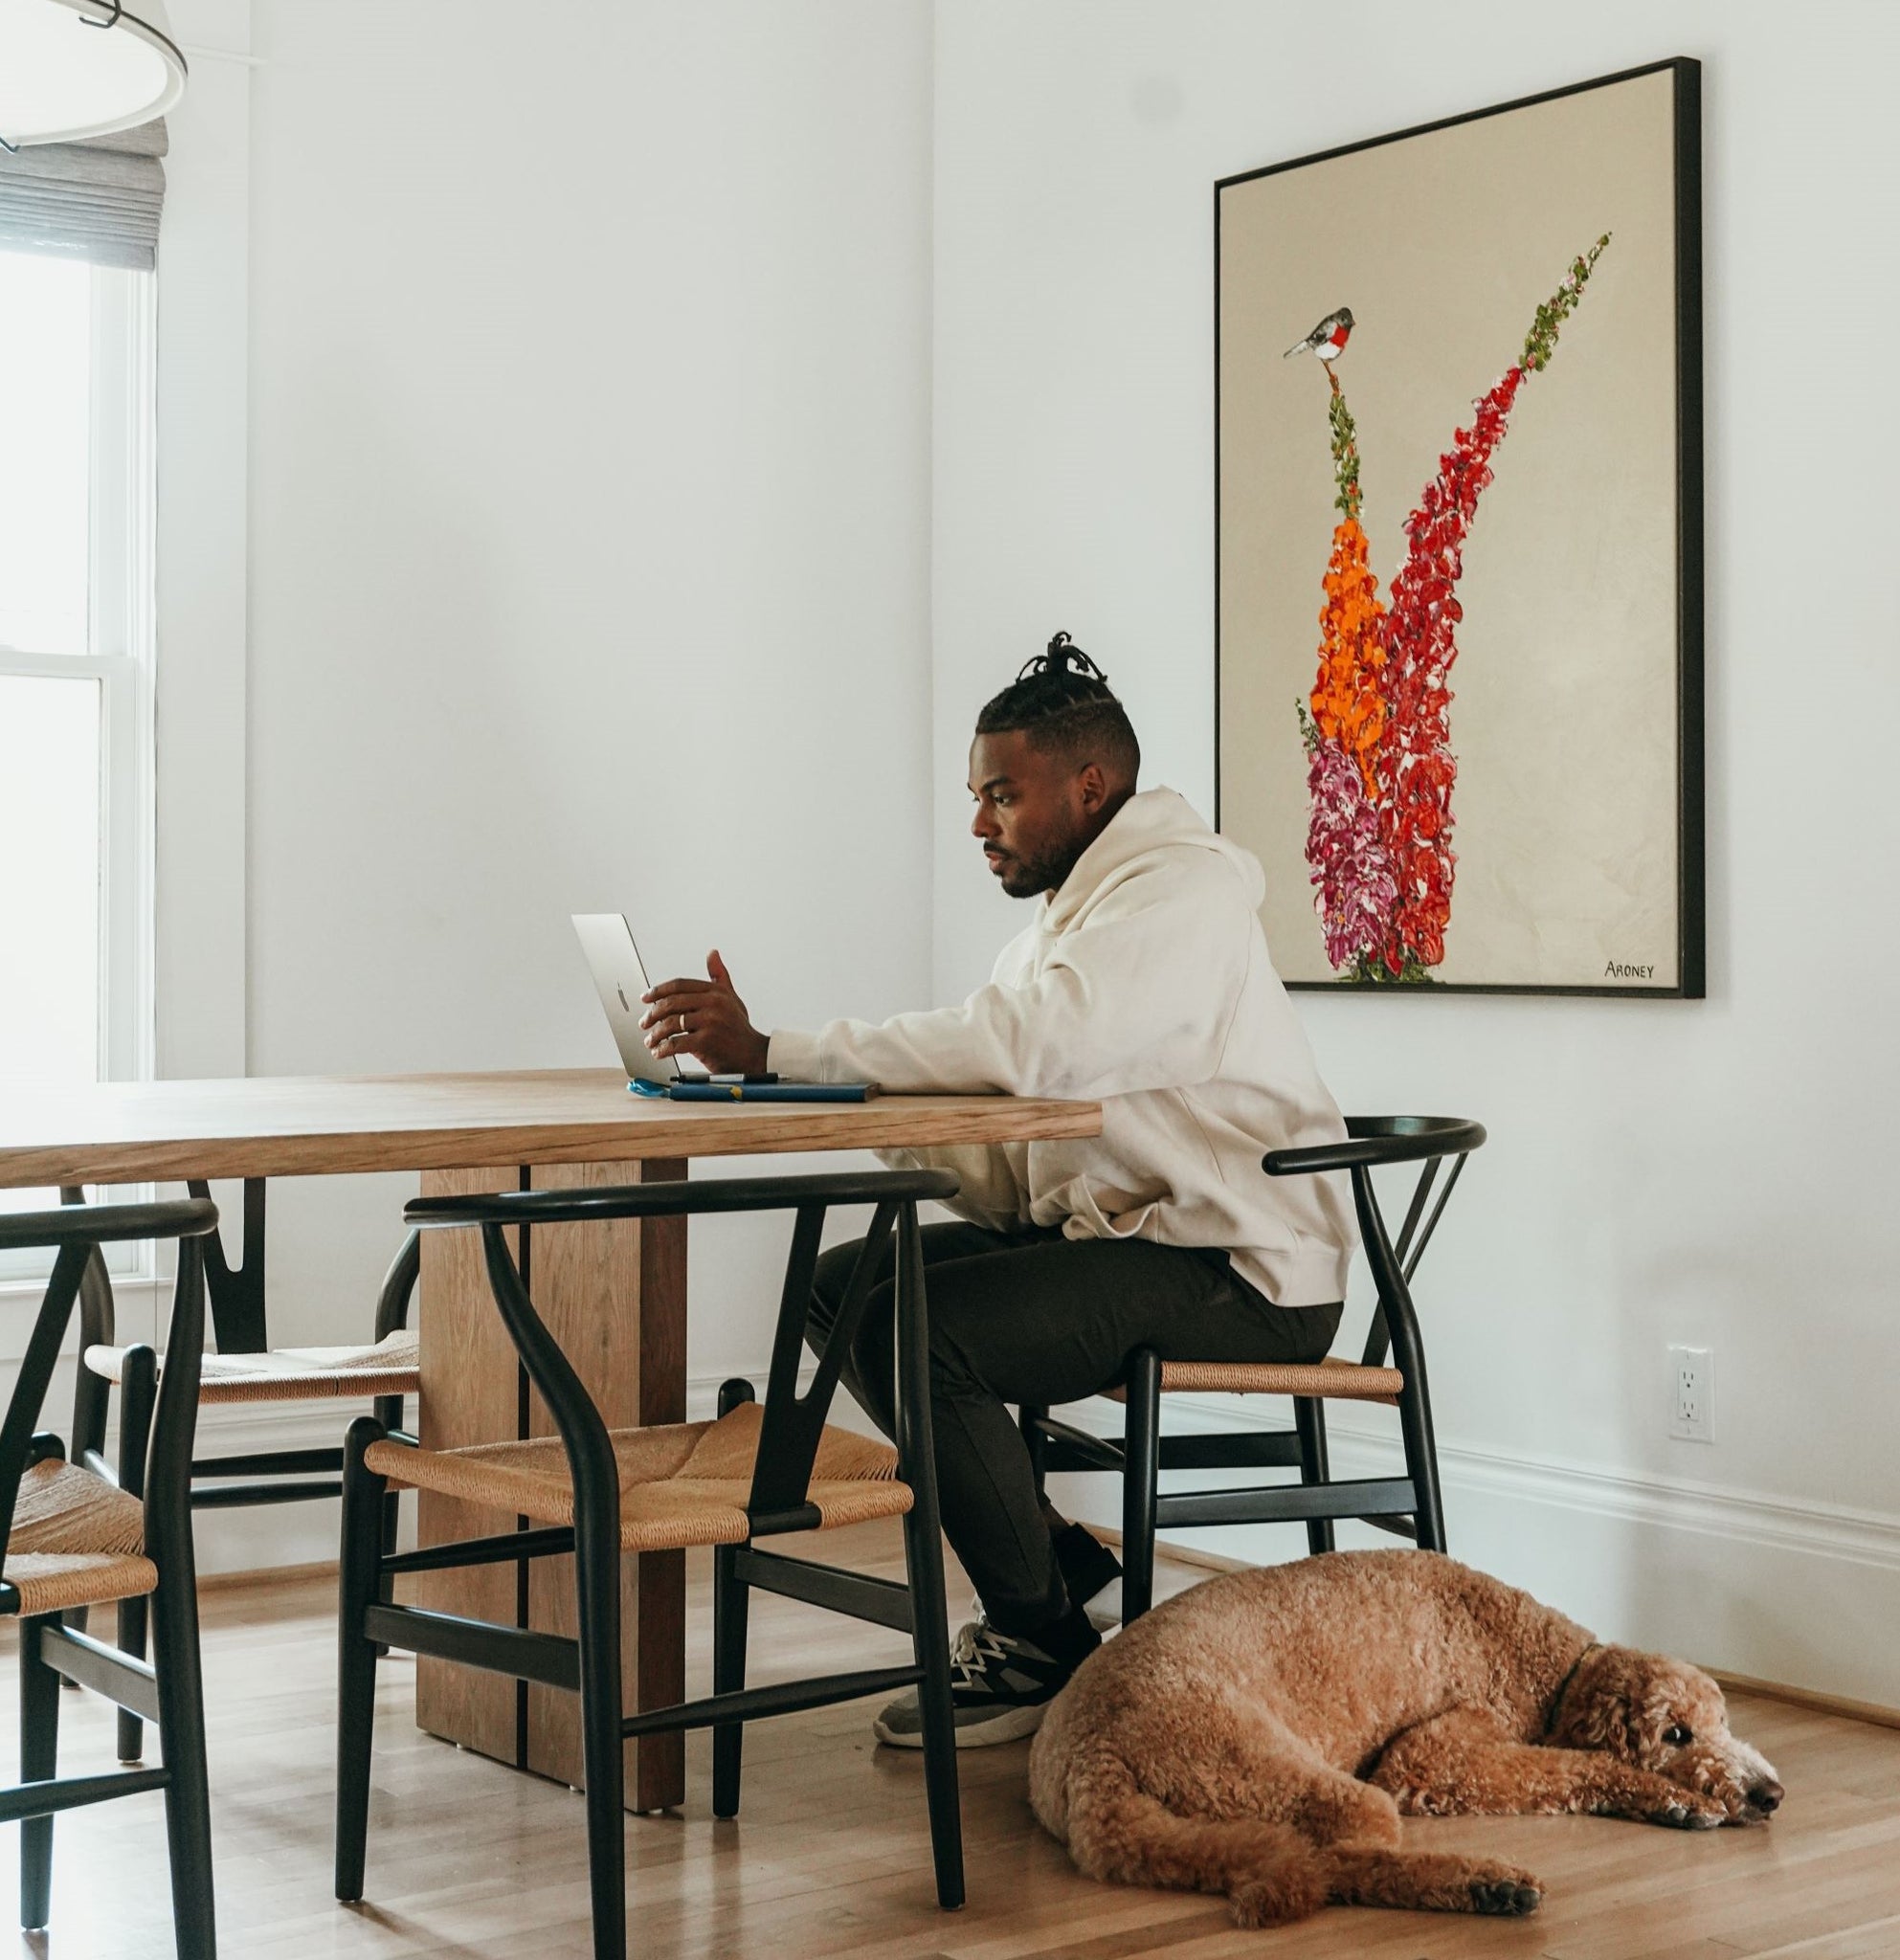 Troy sits at his dining room table looking at a laptop. His dog, a fluffy brown labradoodle, is curled up beneath him on the ground. A large painting of a bright red bird is behind him on the wall.